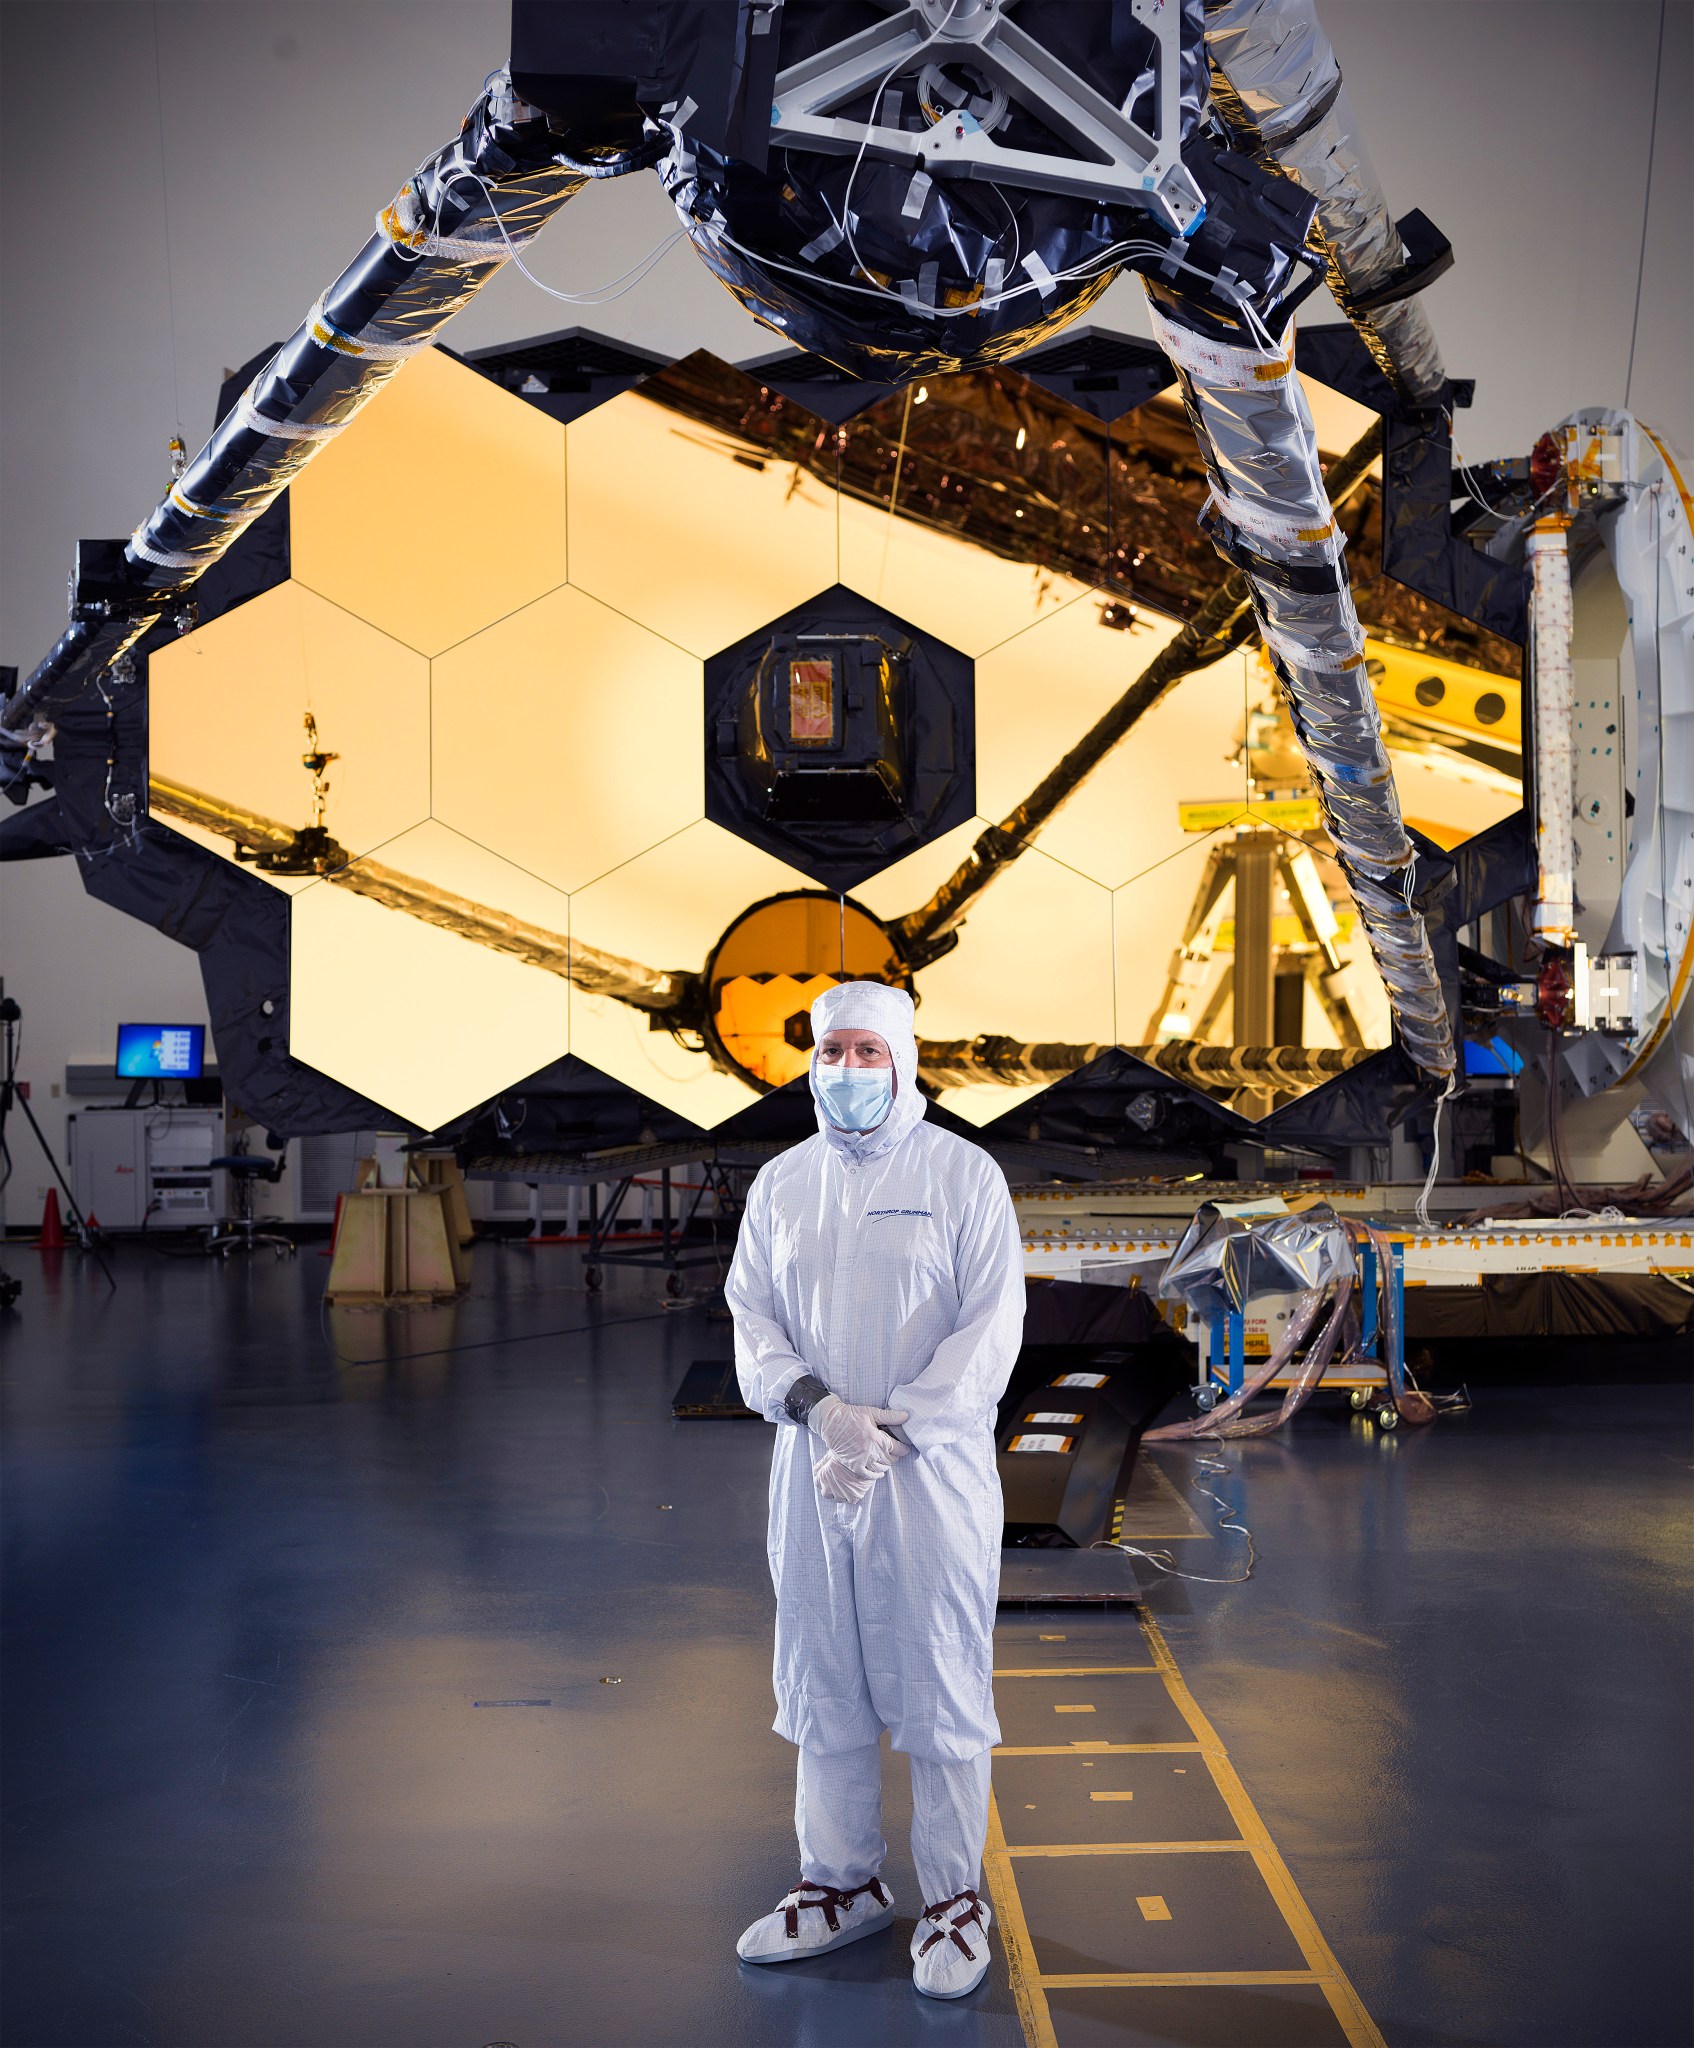 Feinberg, wearing a white "bunny suit" covering in the clean room, standing in from of the James Webb Space Telescope.